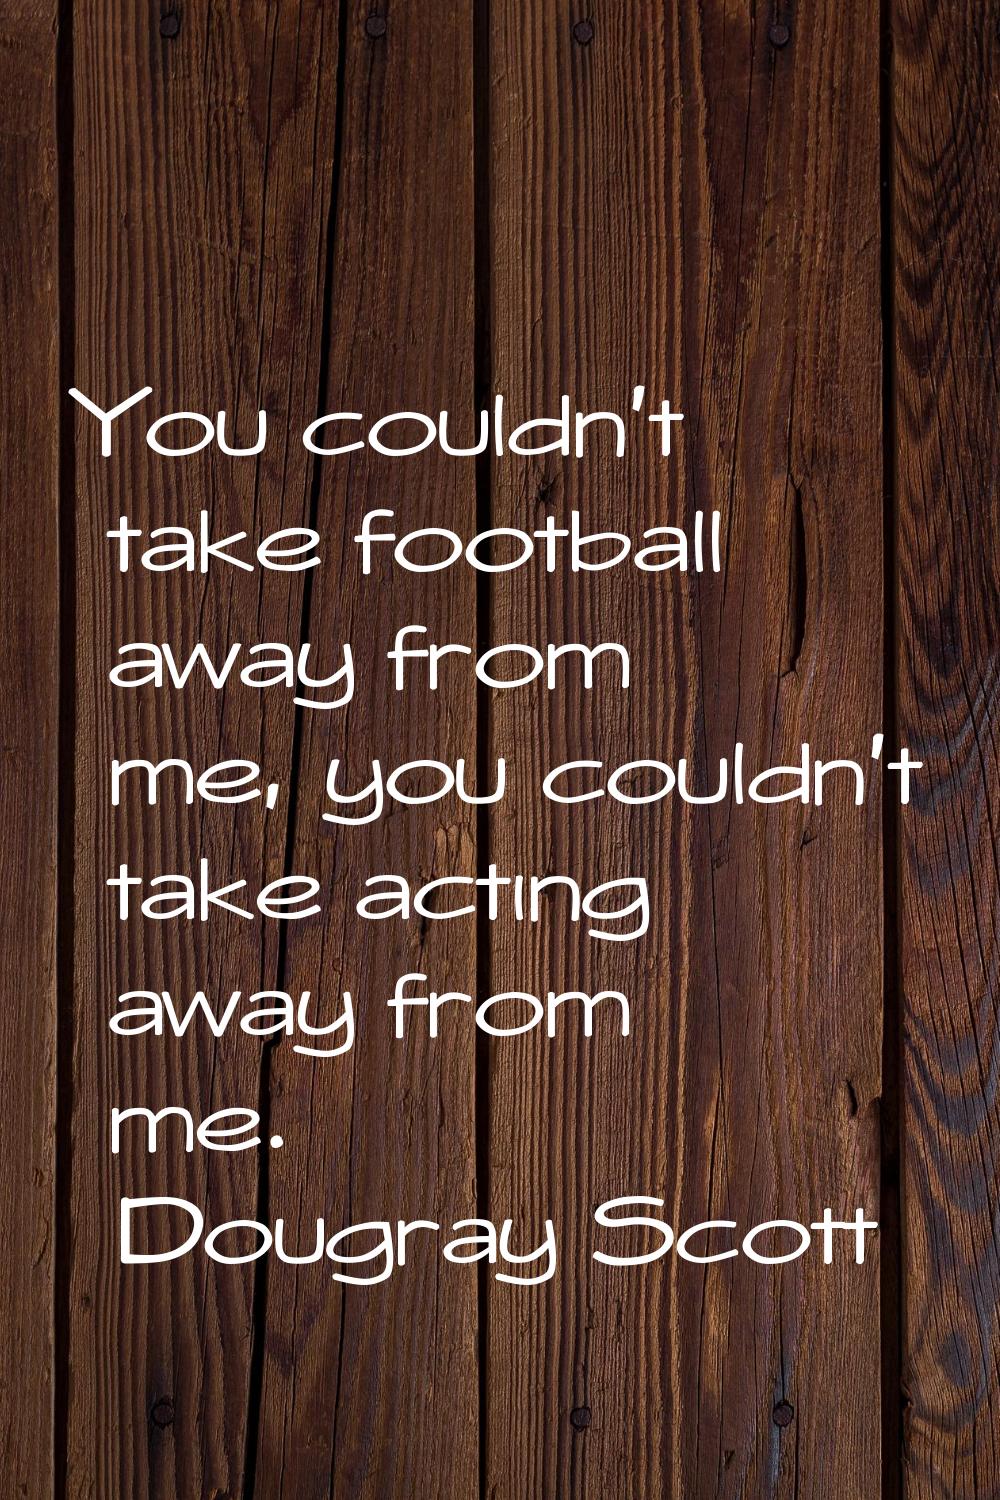 You couldn't take football away from me, you couldn't take acting away from me.